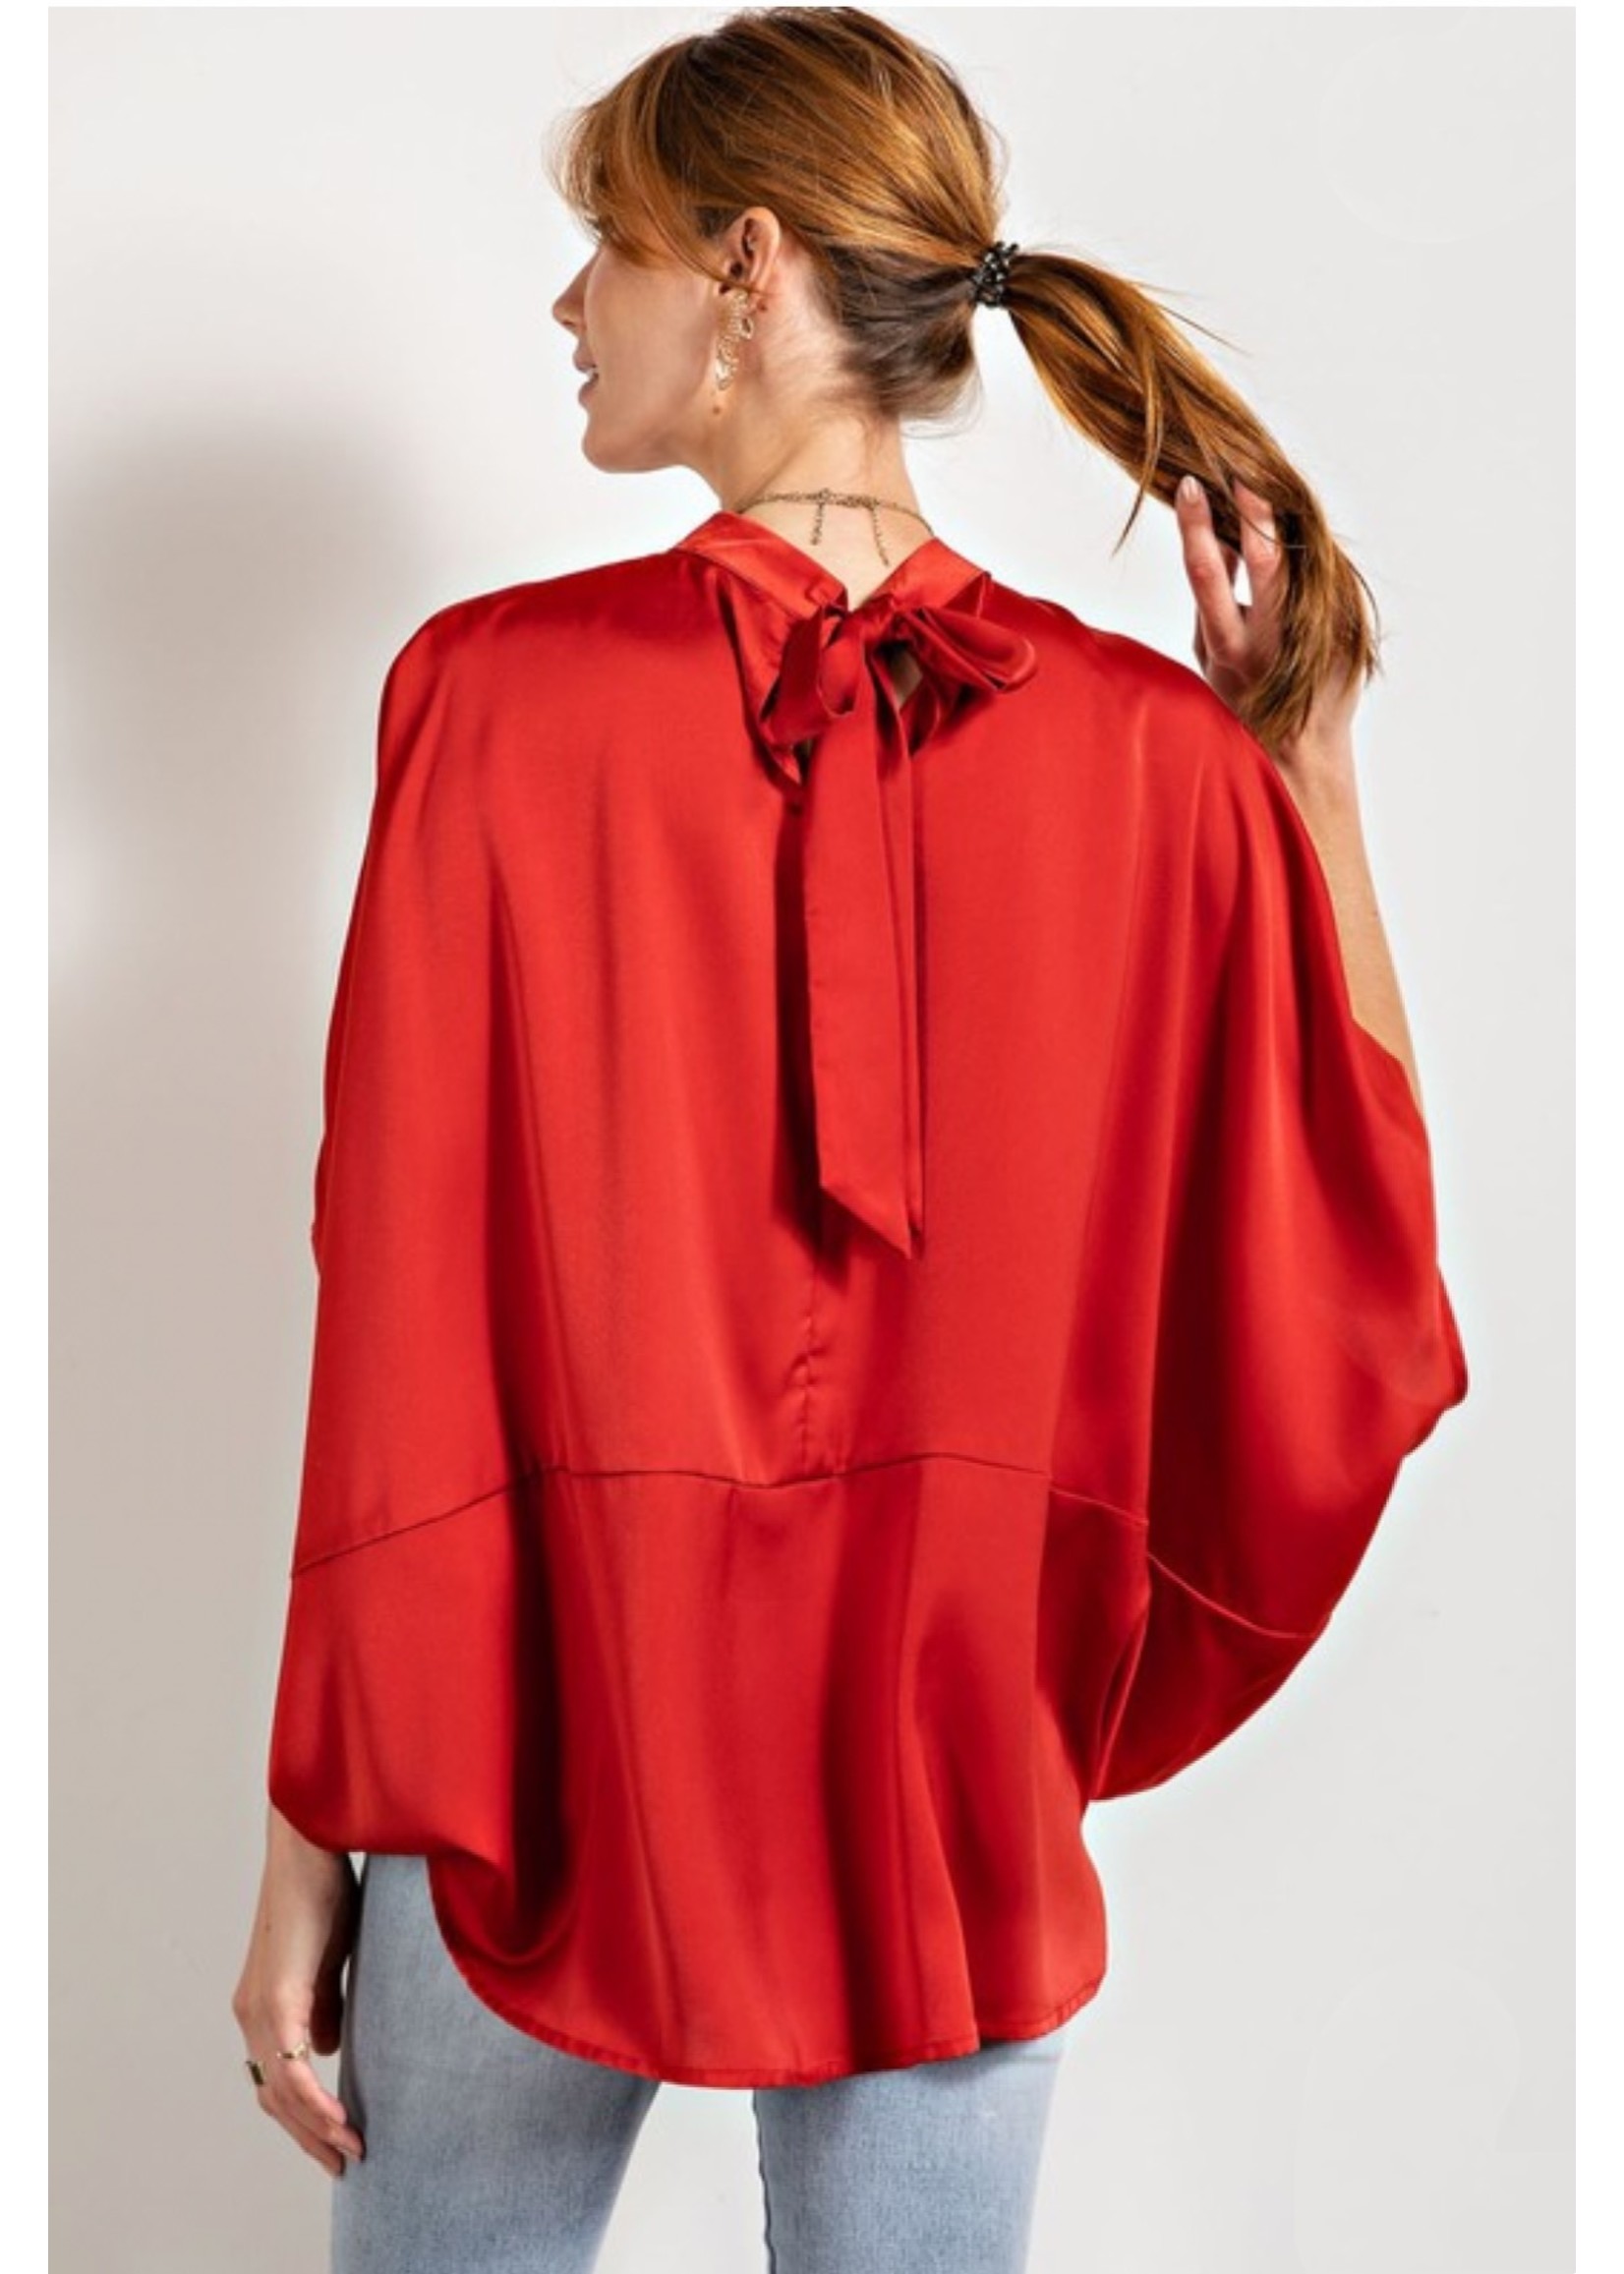 Silky Satin Loose Sleeve Blouse with Bow at Neckline-Red